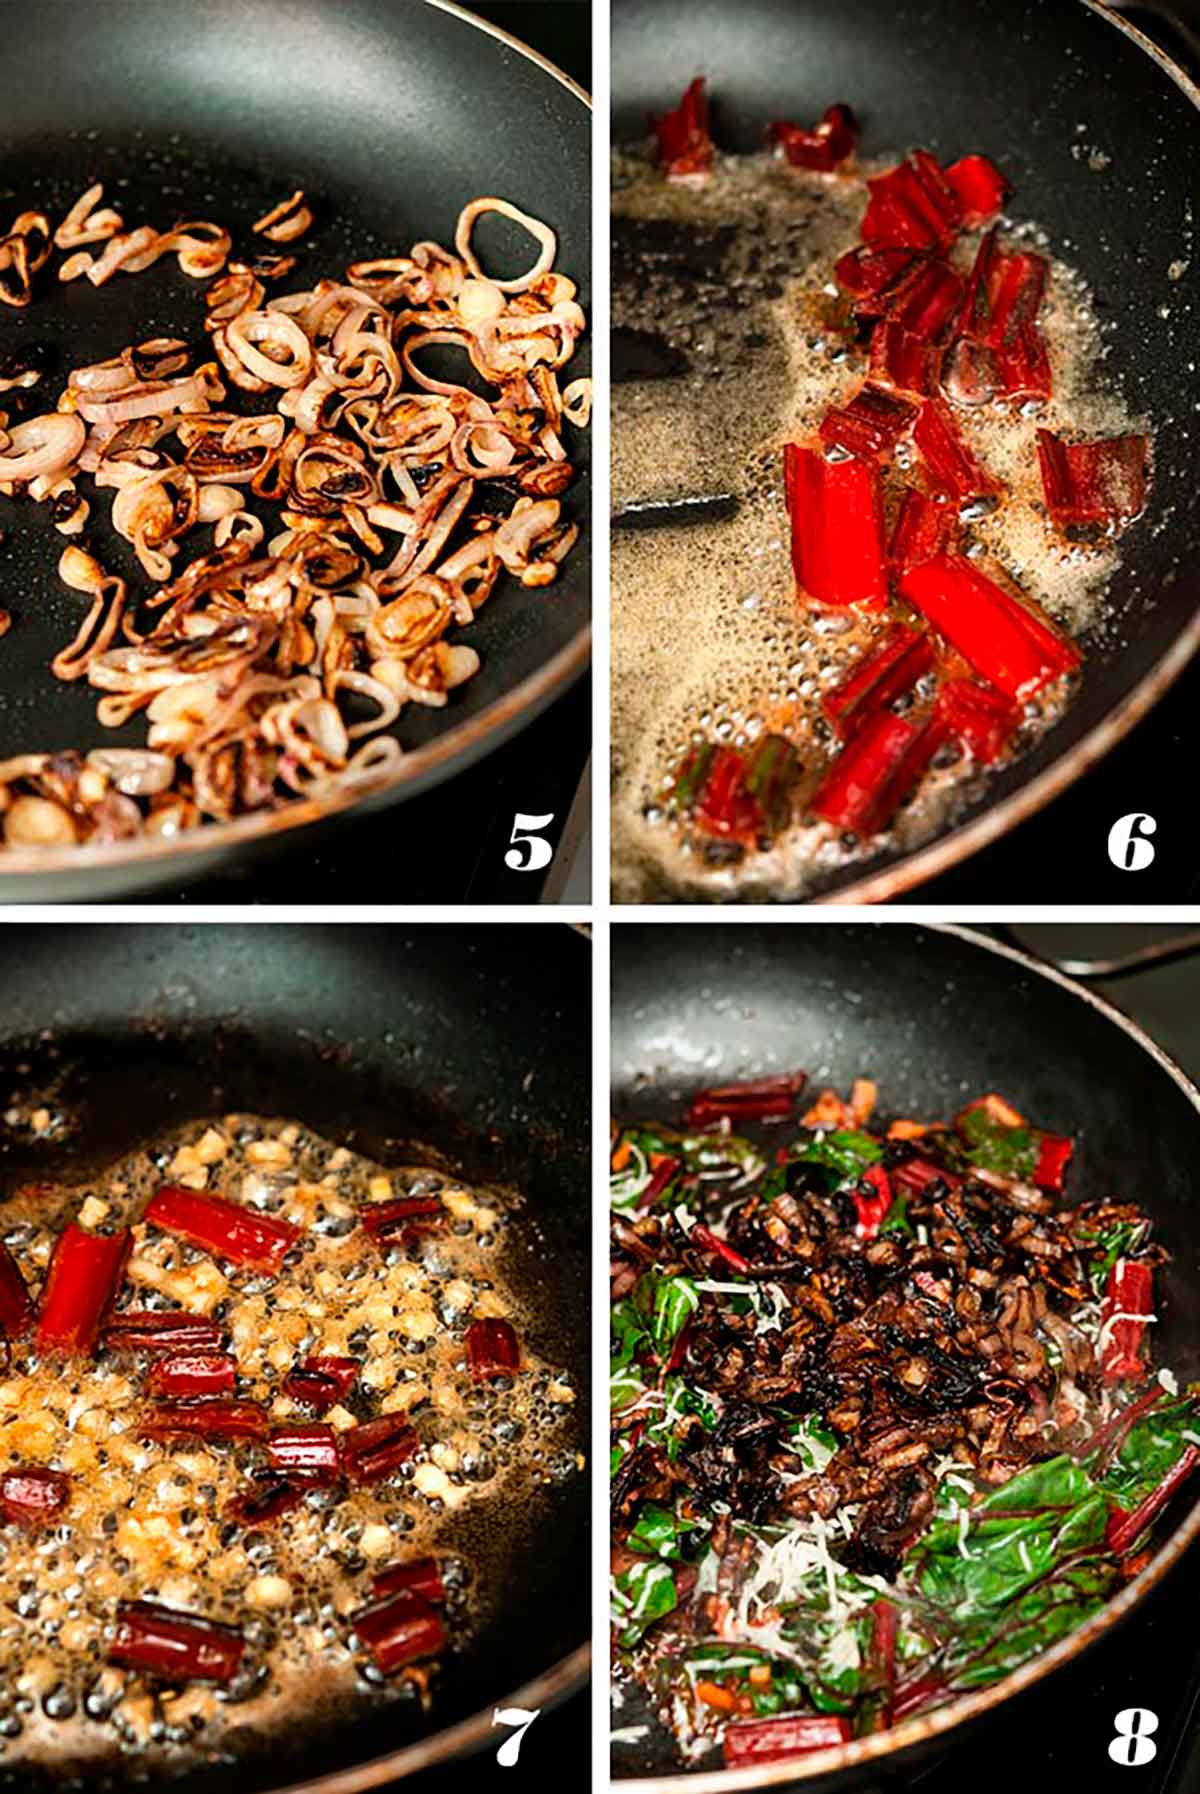 A collage of 4 numbered images showing how to caramelize shallots, and sauté chard.